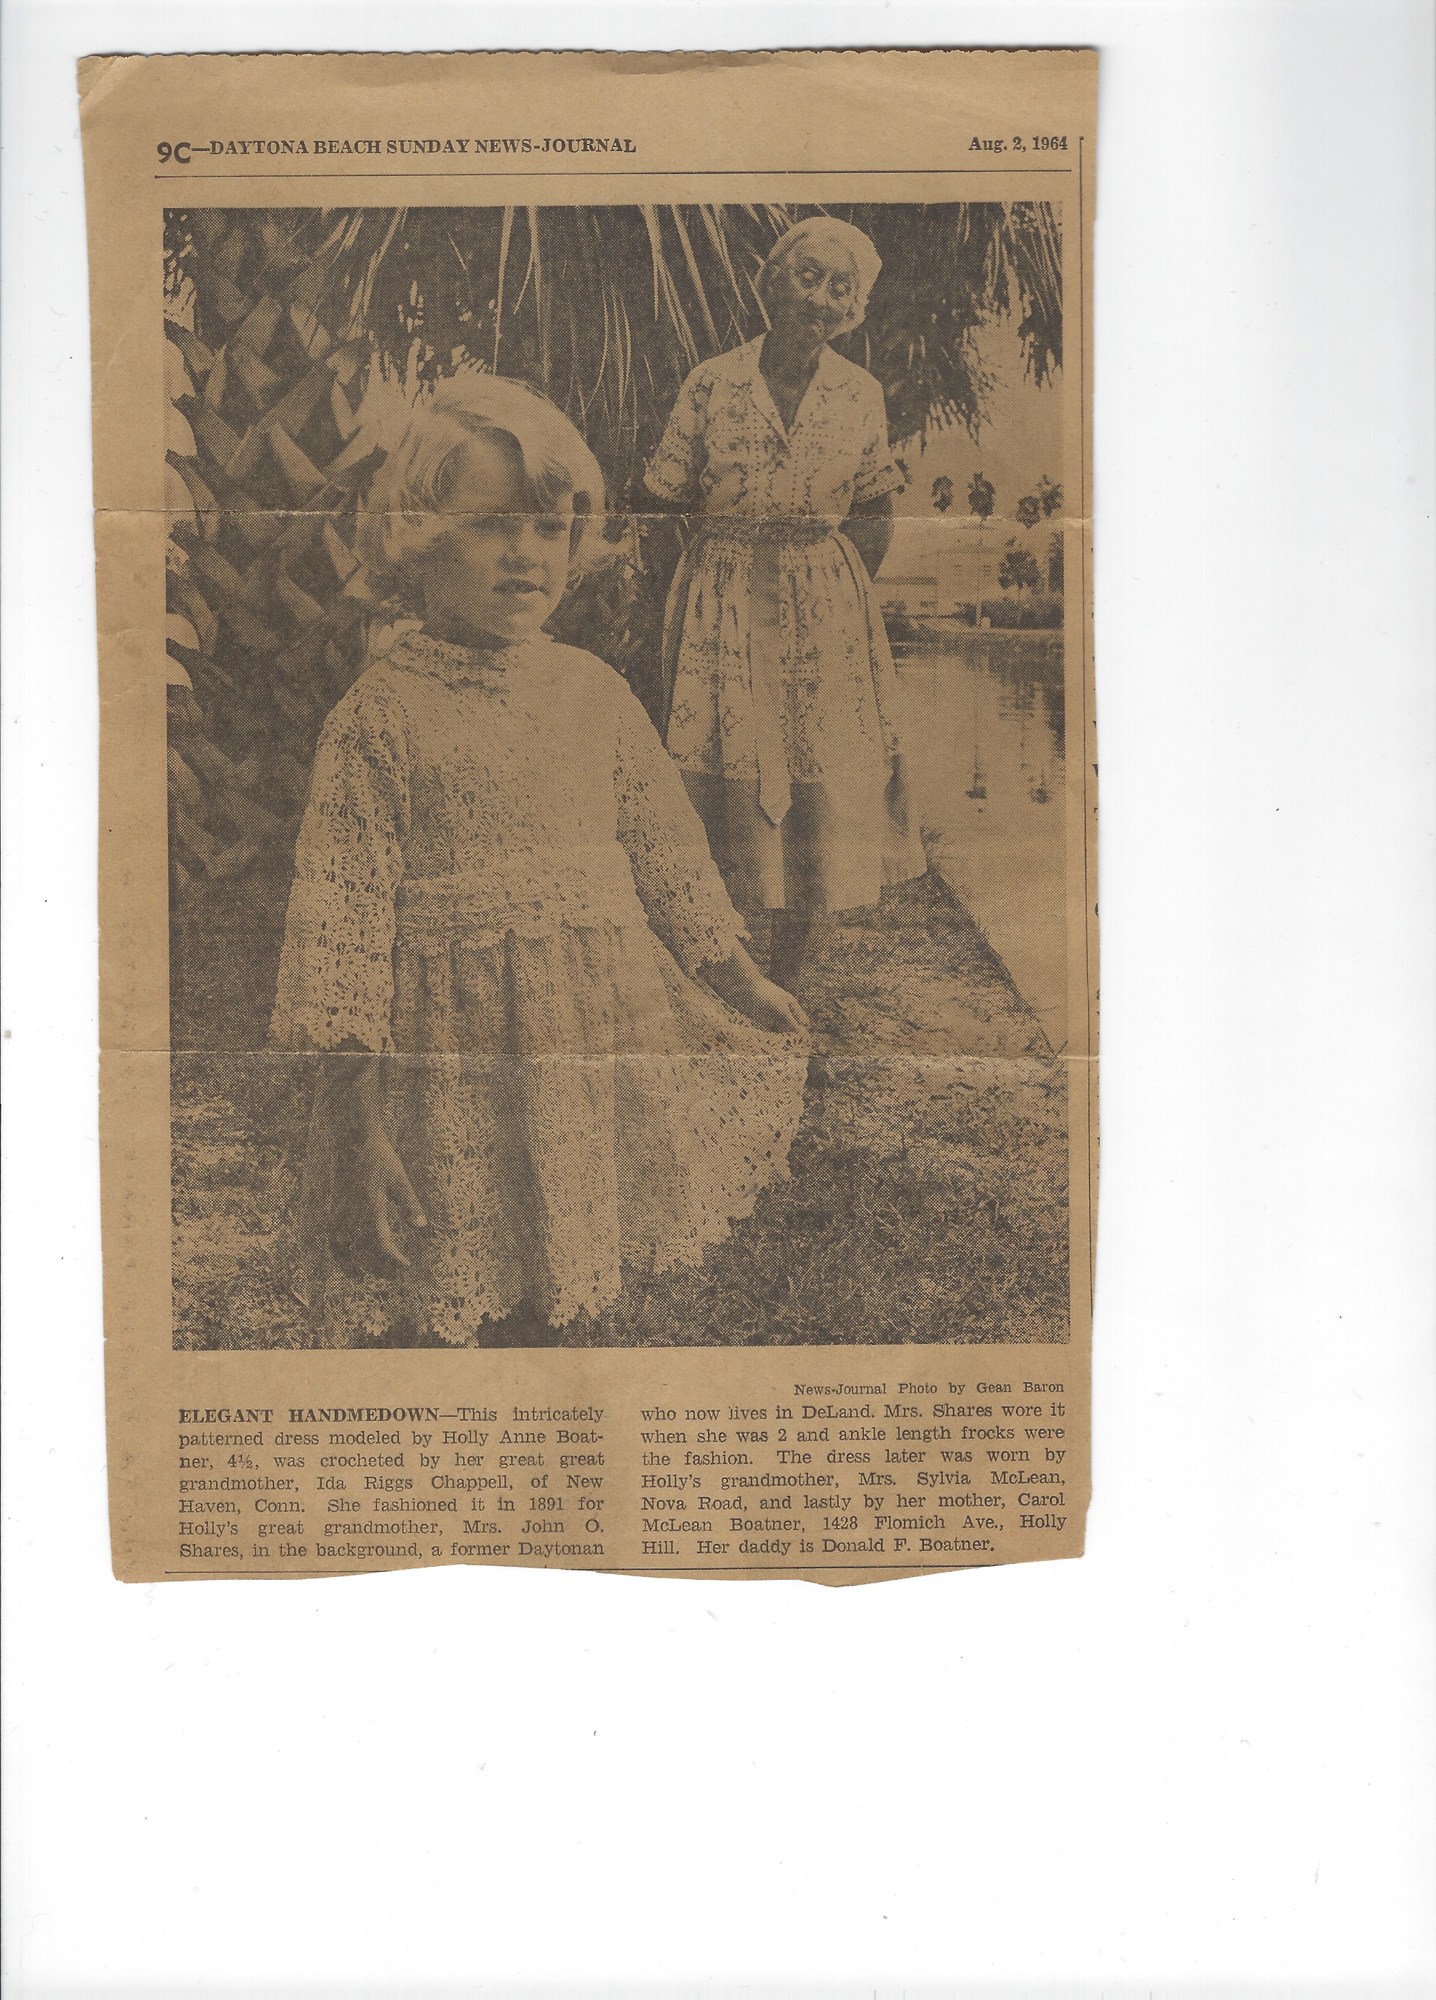 The dress was featured in a 1964 article in the Daytona Beach News-Journal. Wearing the dress is Holly Anne Stephens, when she was 4-and-a-half years old. Courtesy photo